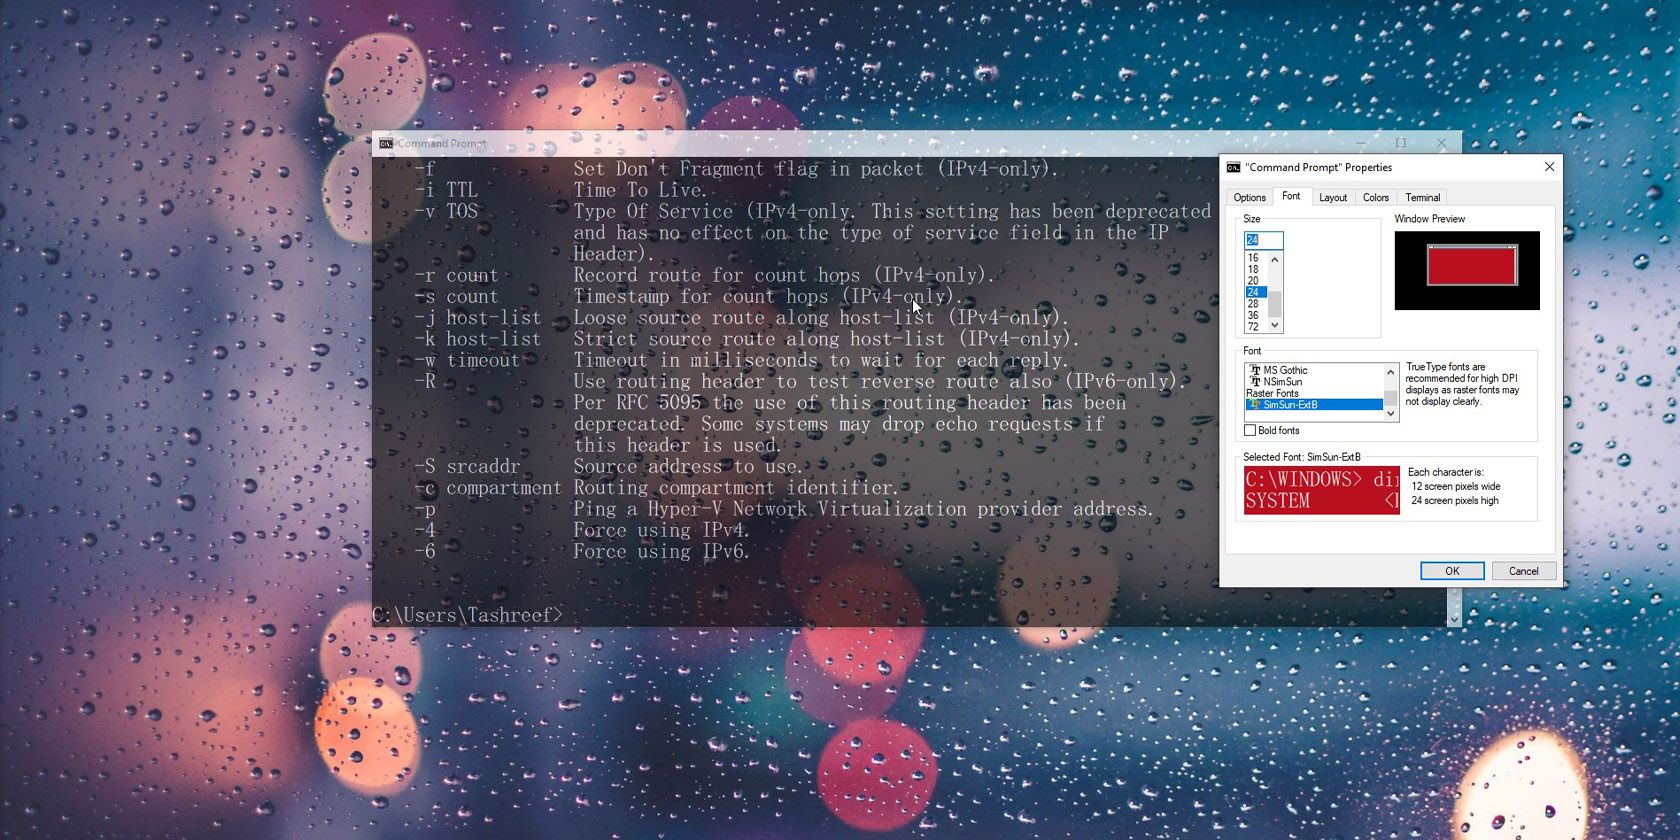 How to Customize the Command Prompt in Windows